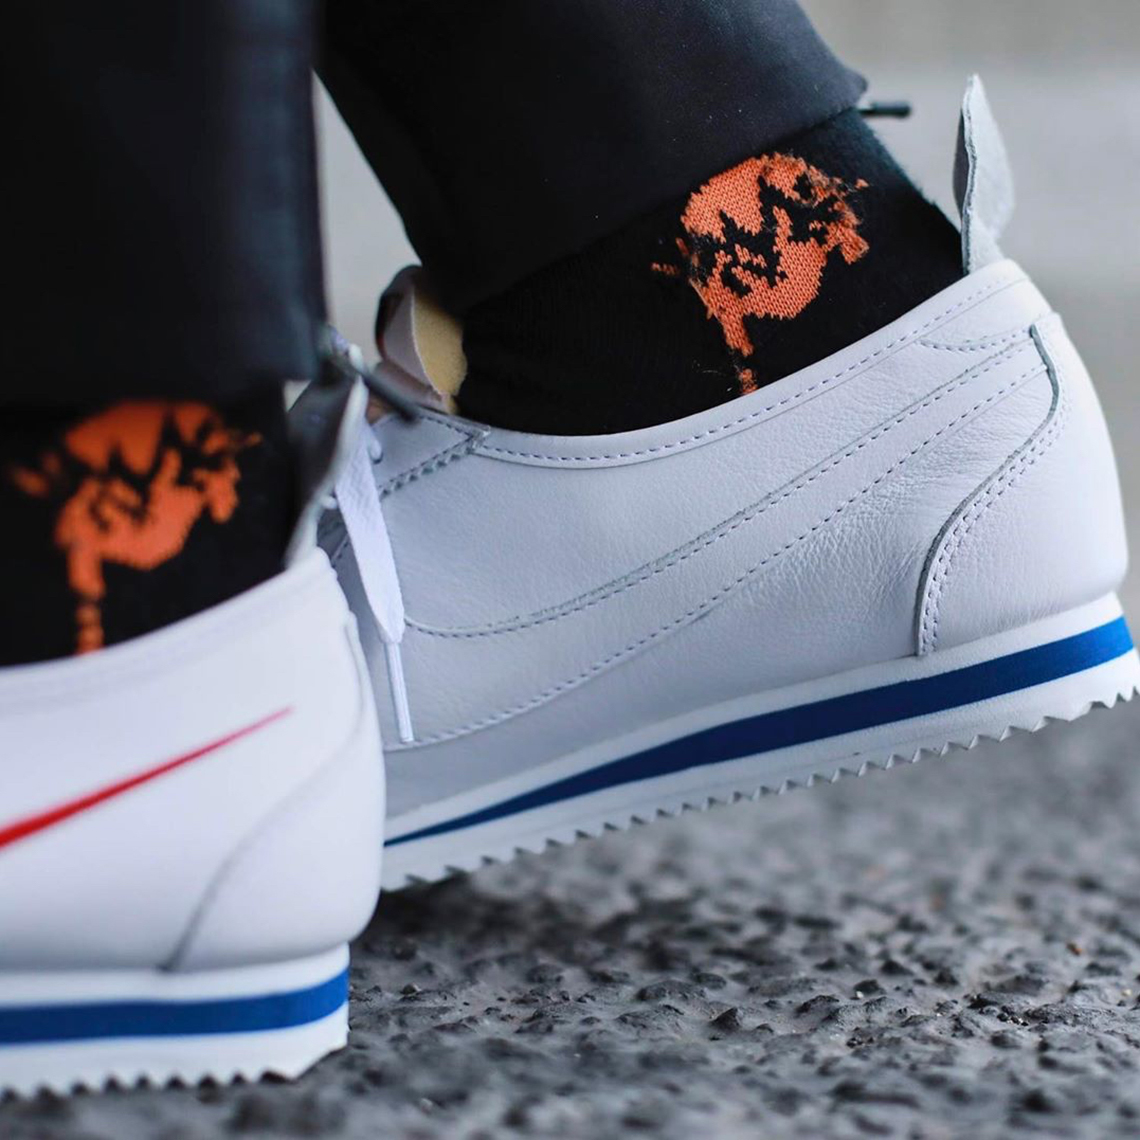 Nike Cortez Shoe Dog Pack Official Release Date | SneakerNews.com